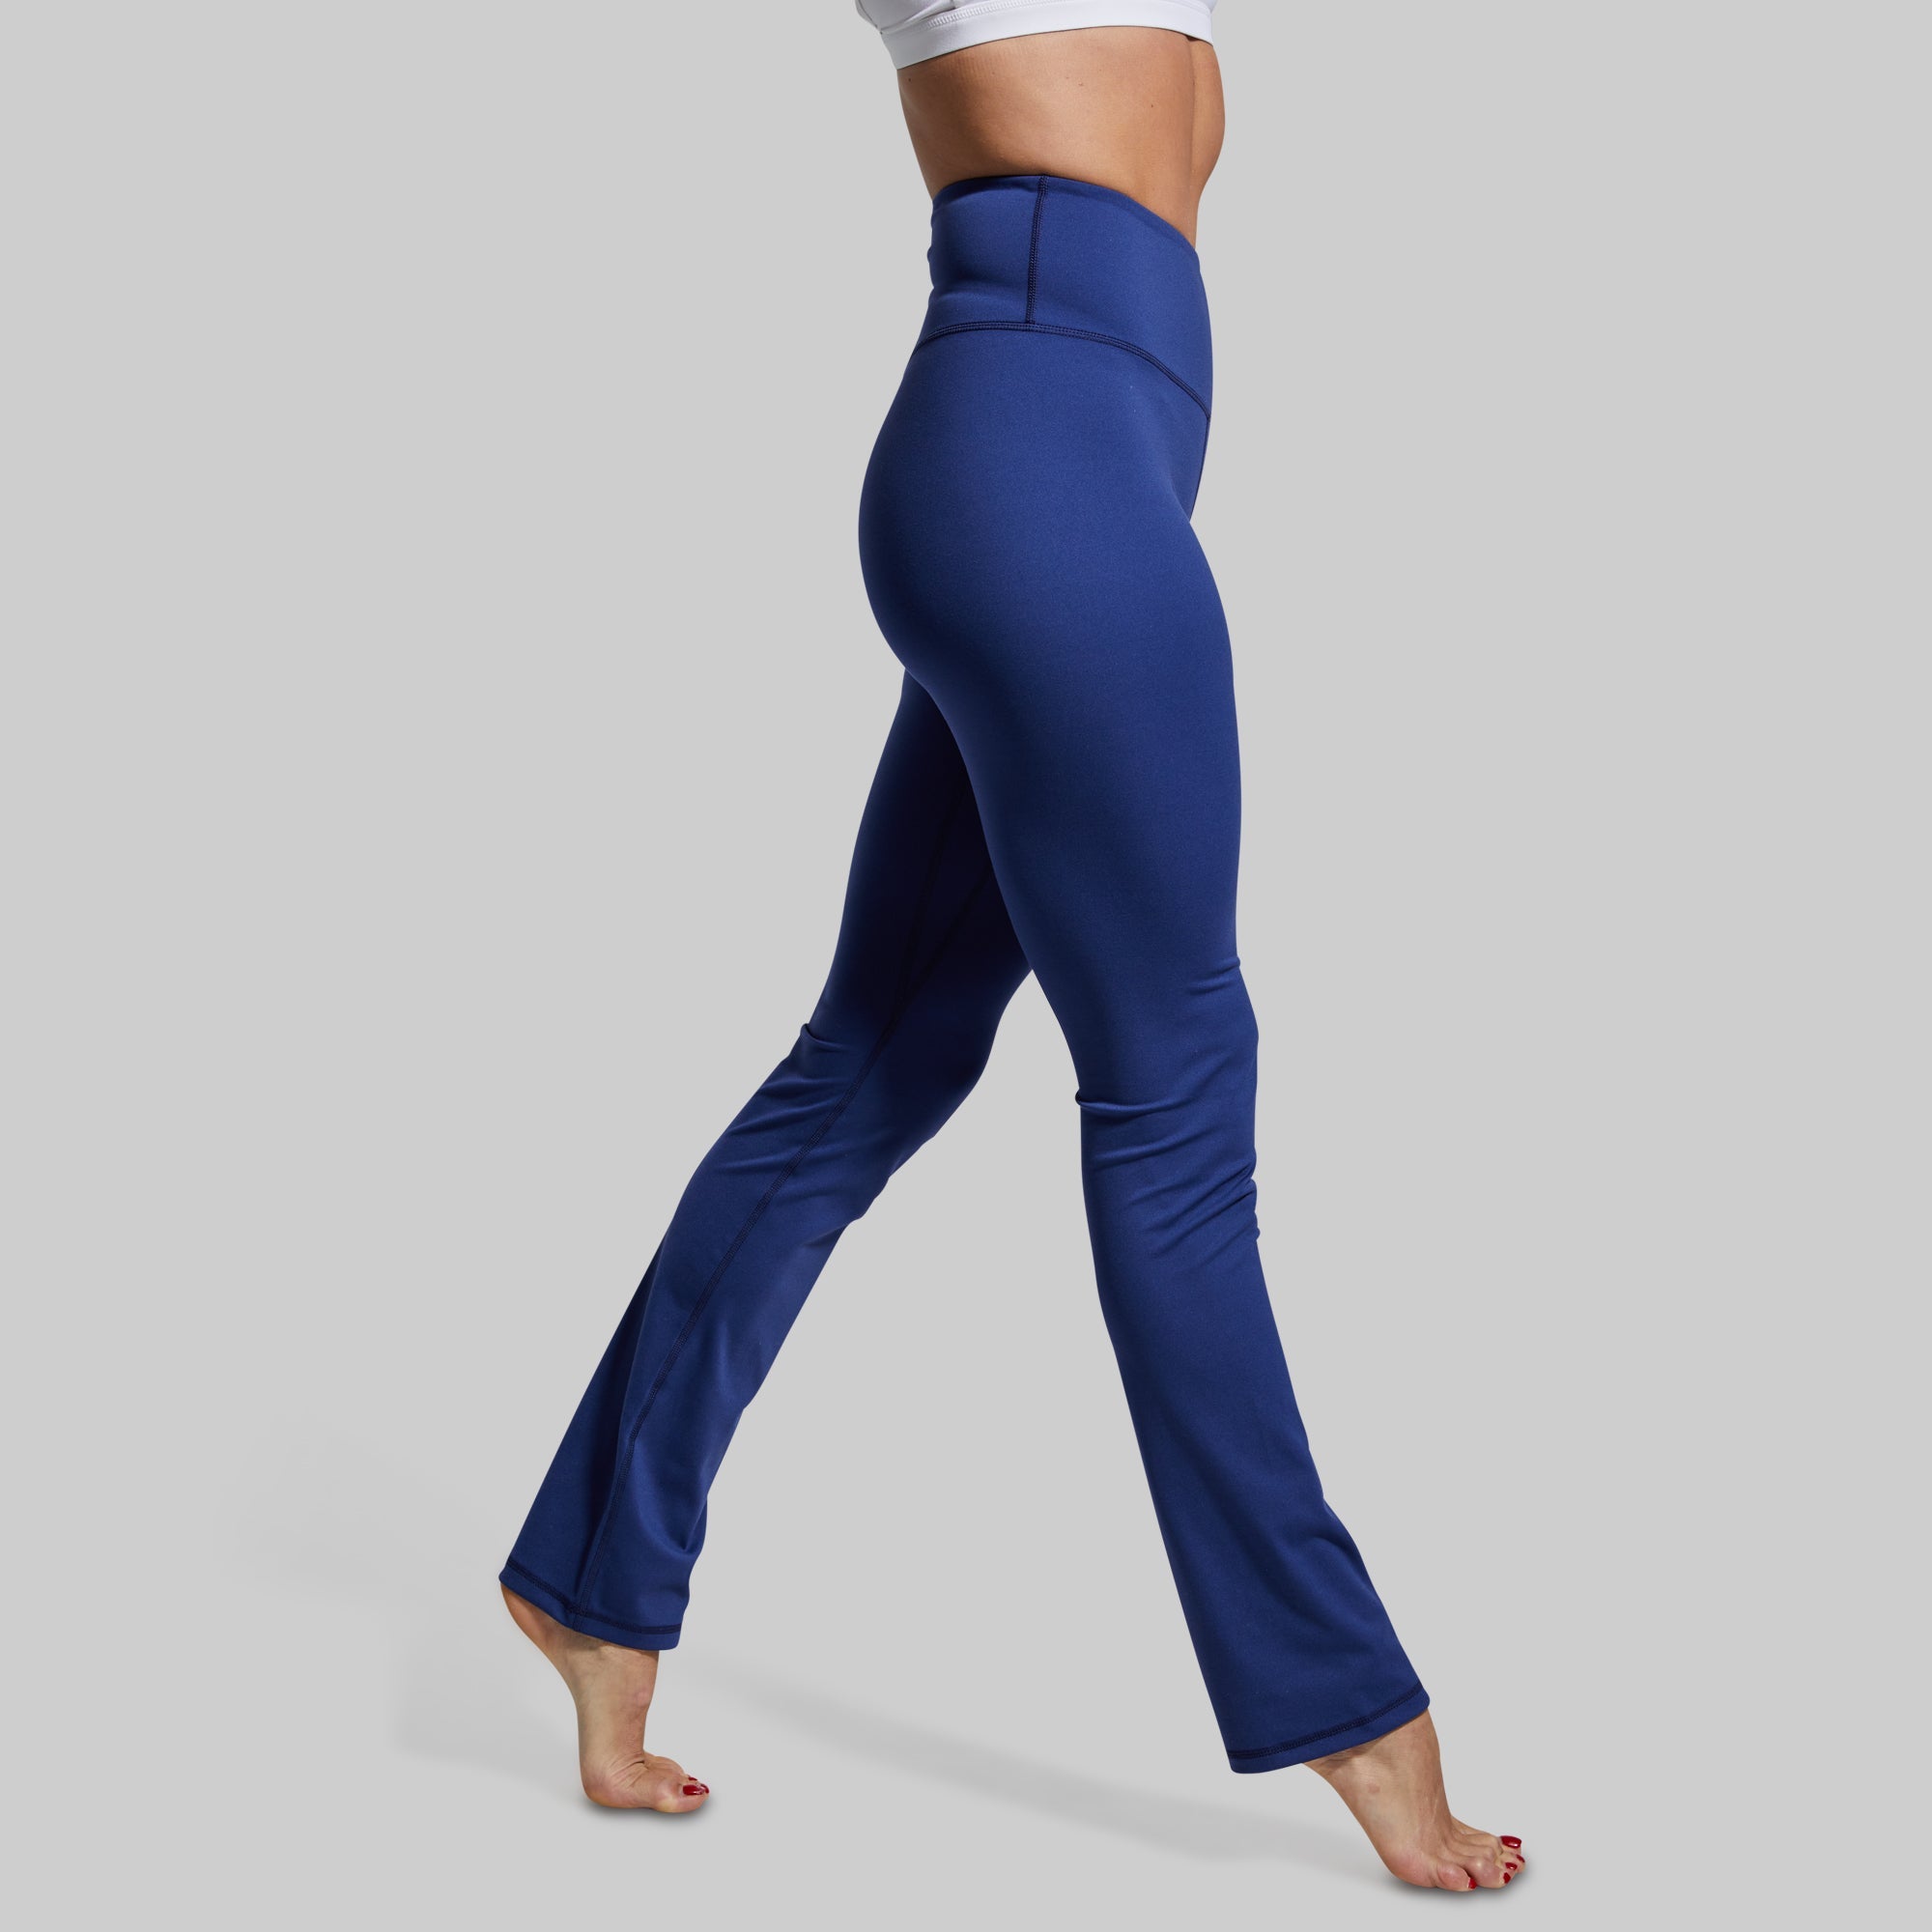 Navy yoga pants for women, straight-fit workout & exercise pants.